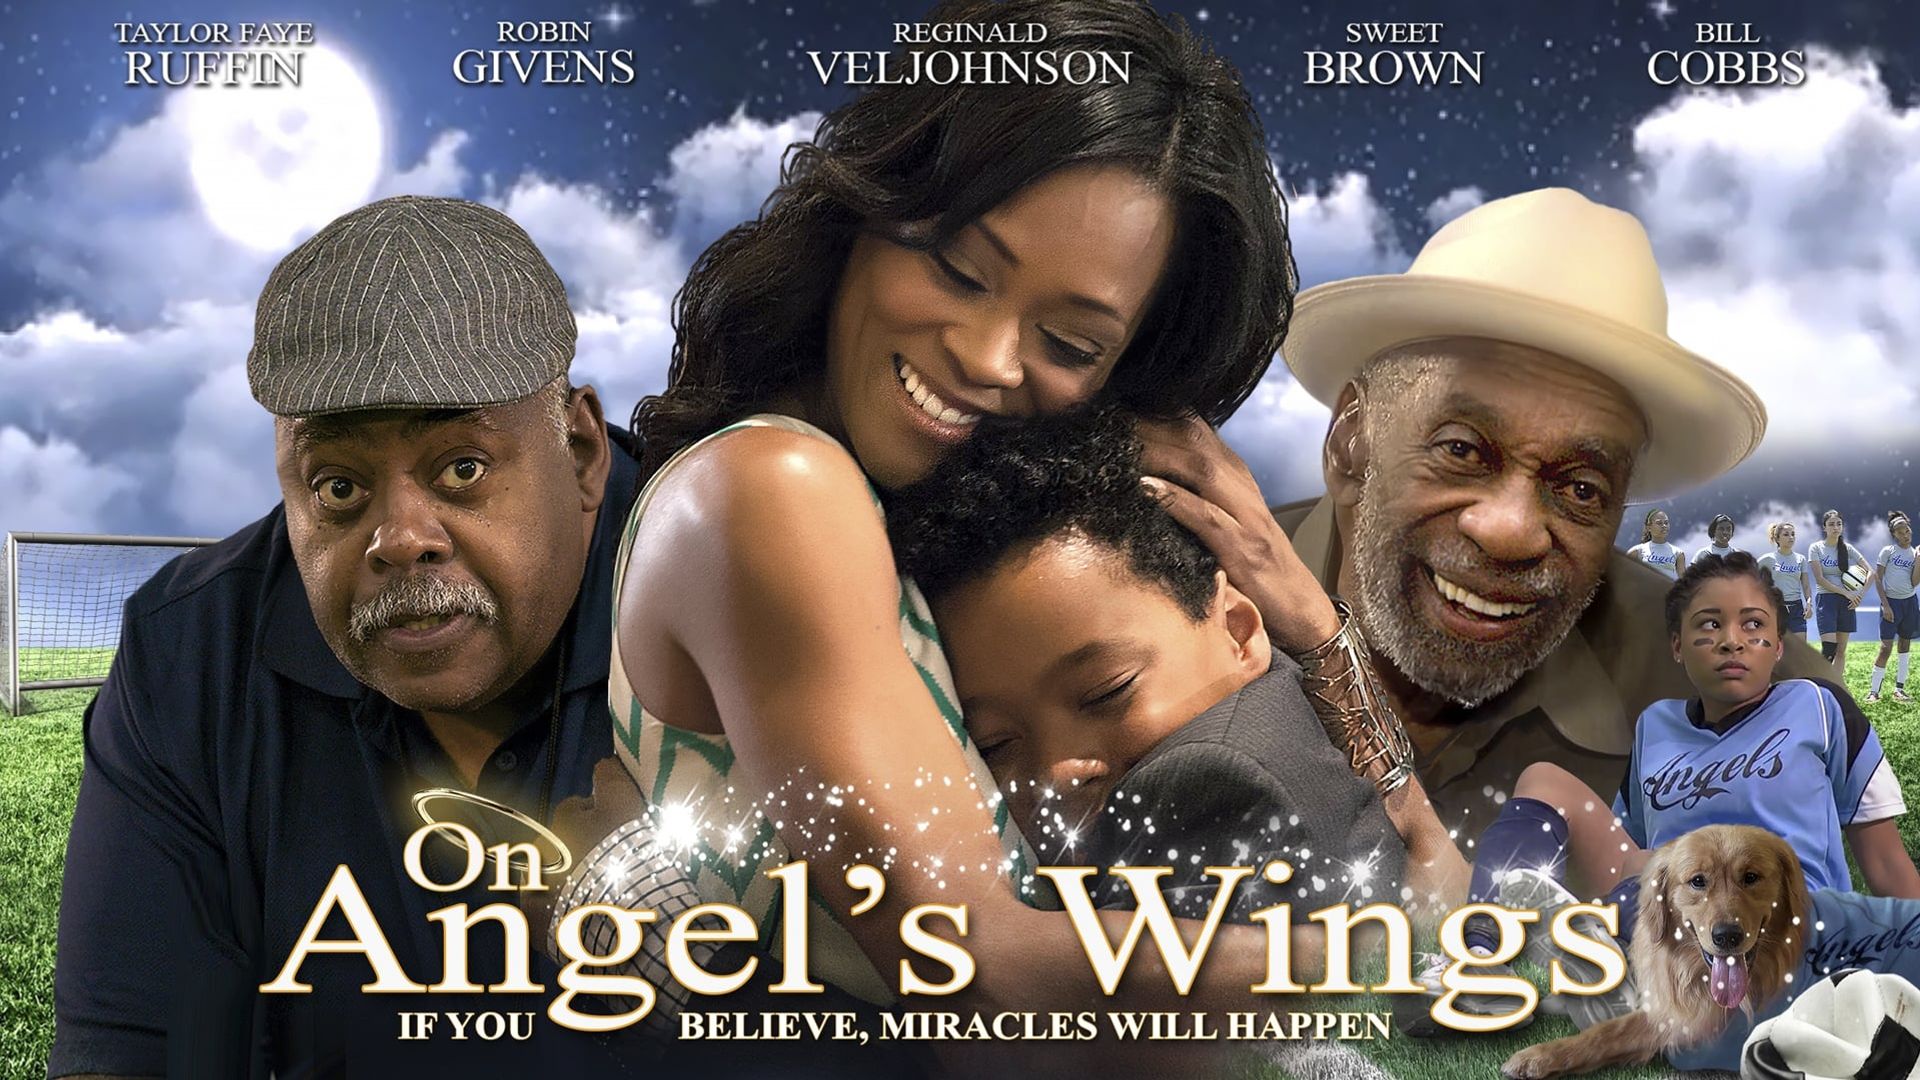 On Angel's Wings background